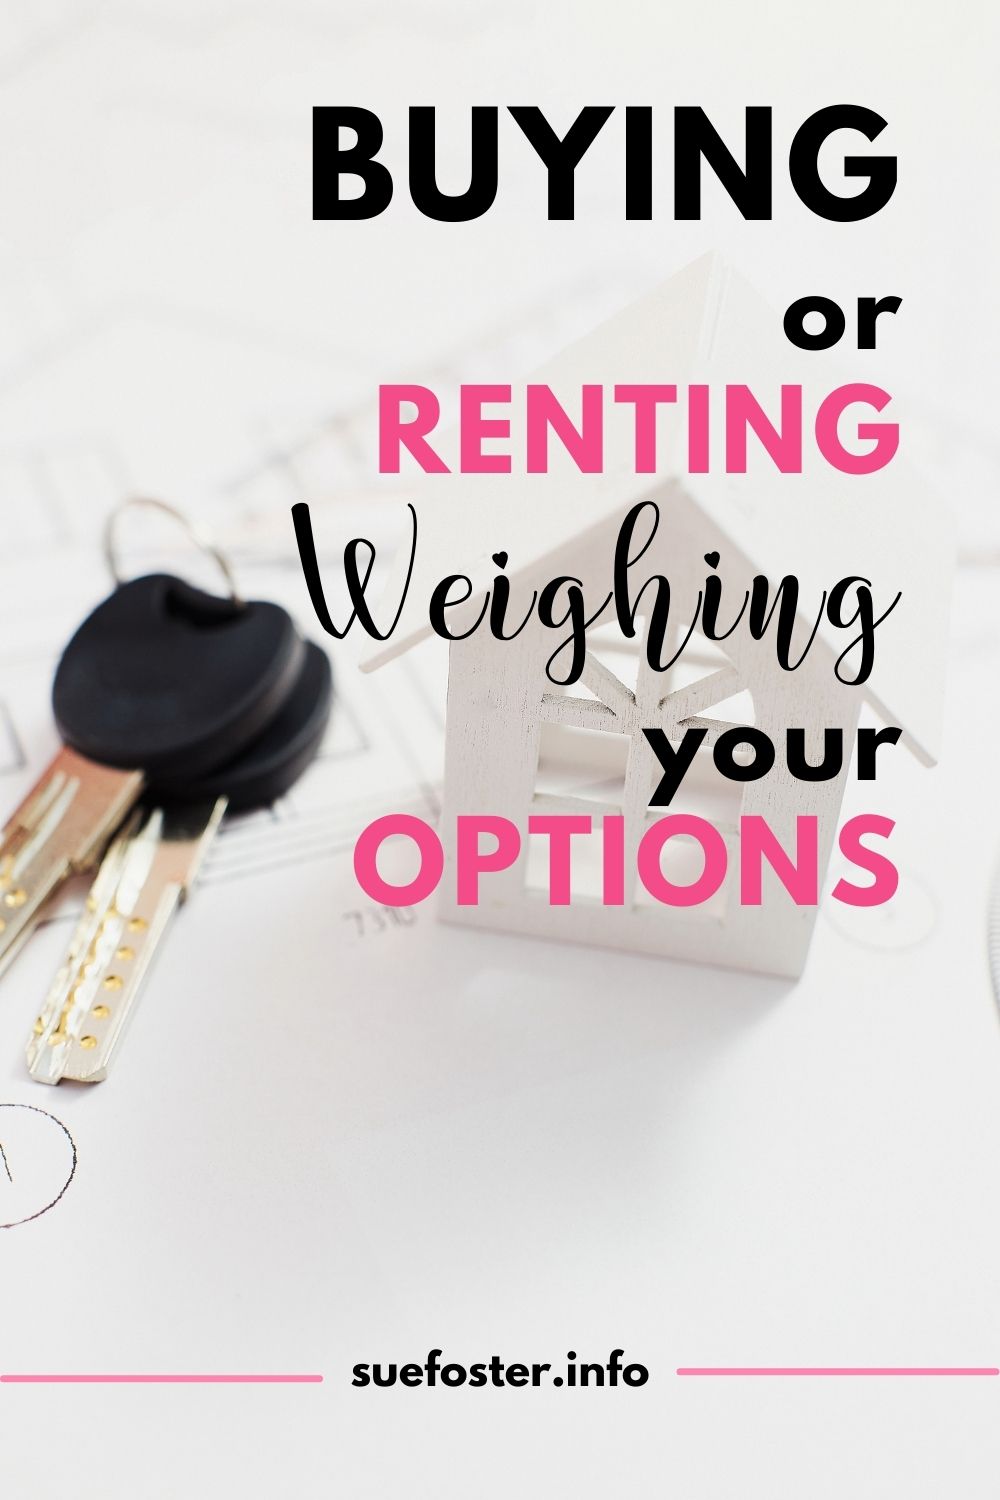 When you are looking for a new living space, you may be faced with the decision of buying a home or renting one. Weigh the pros and cons before you make a decision.